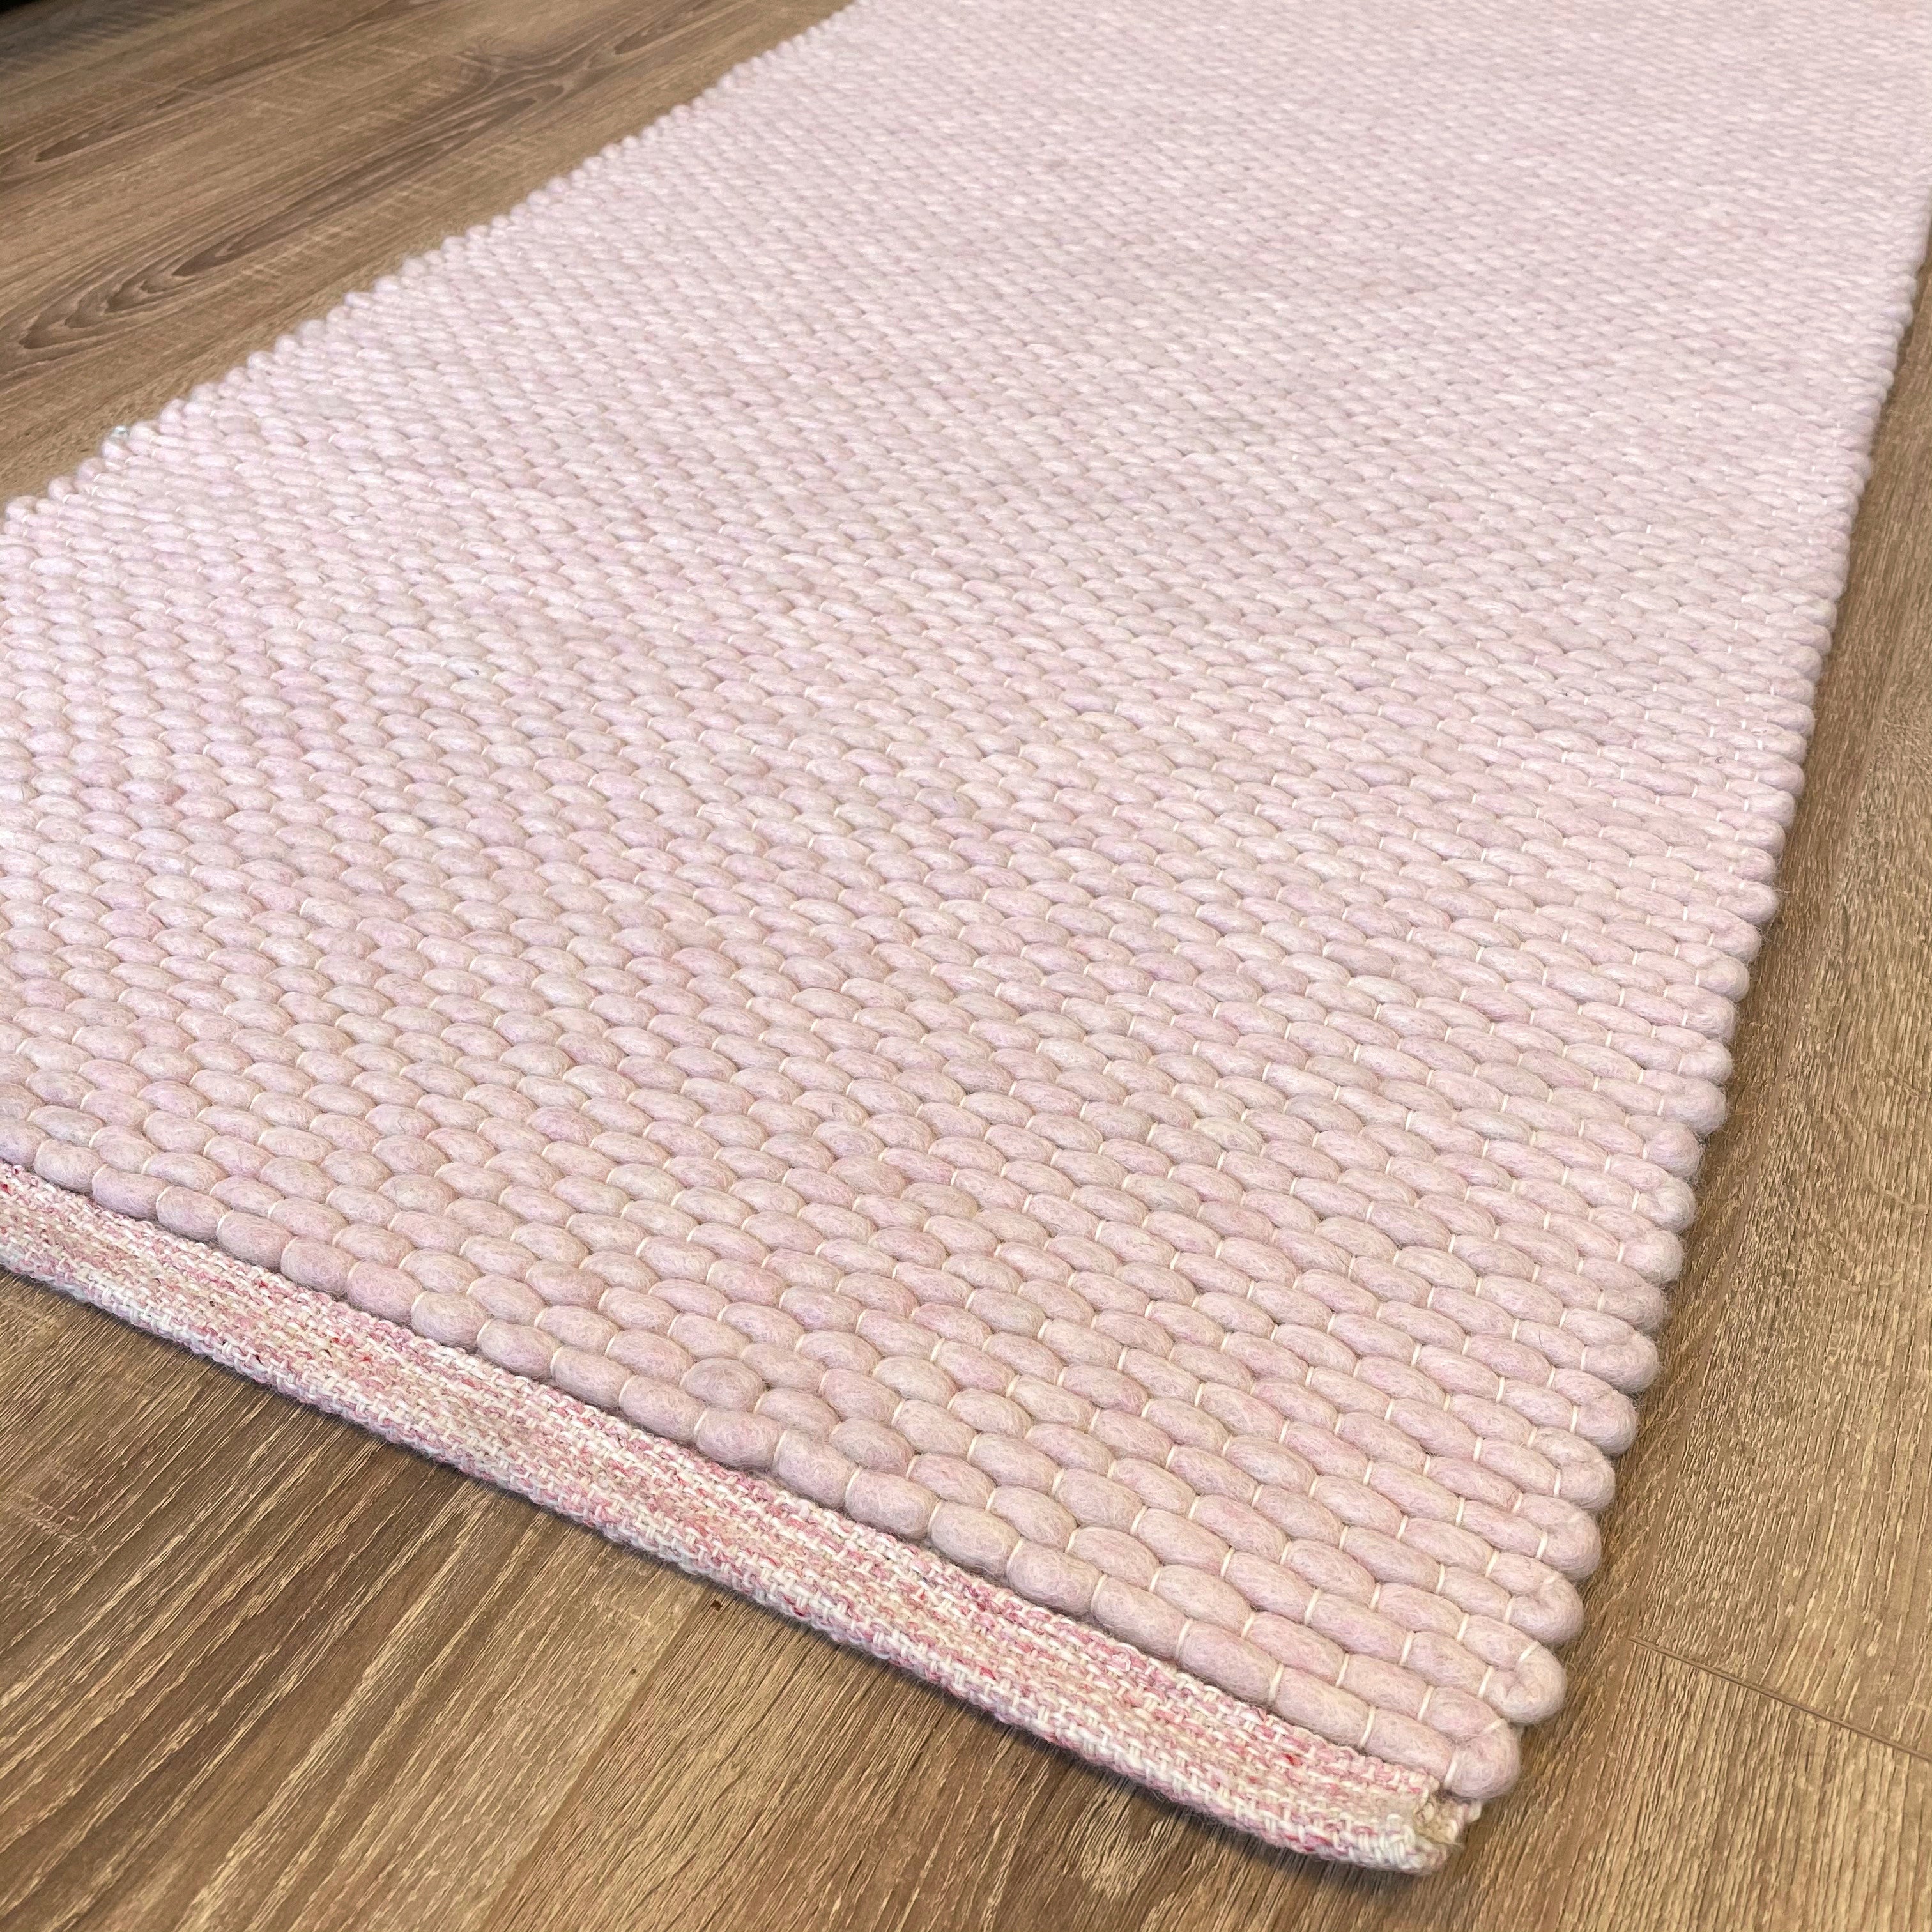 An image of Hermes Hand Woven Wool Rug Thick Loom - Powder Pink 120x180cm